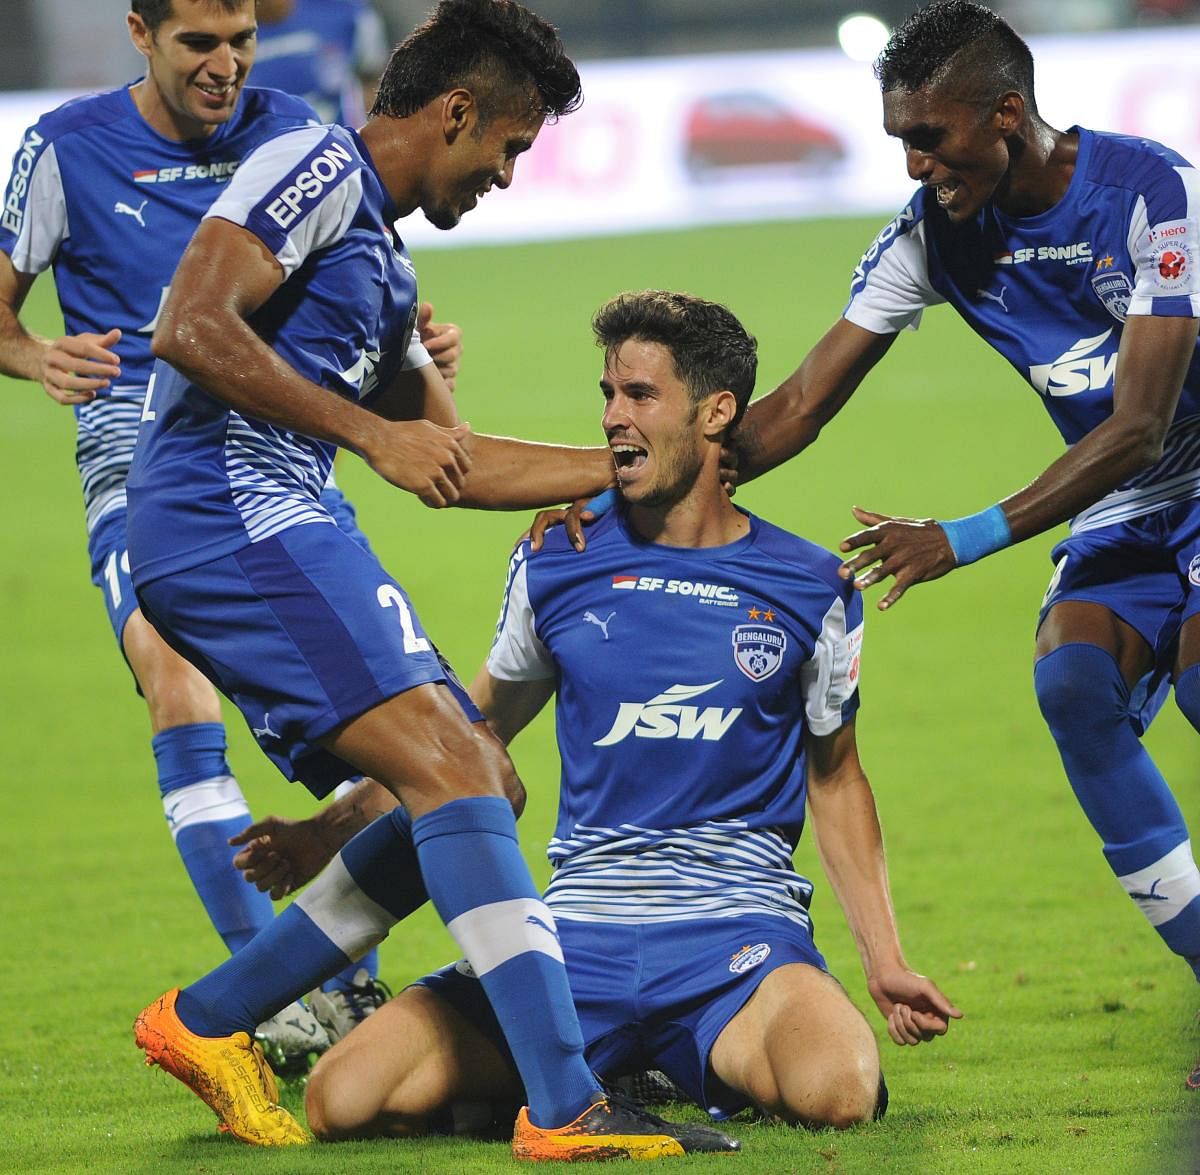 Bengaluru FC began their maiden Indian Super League campaign with a satisfying 2-0 win over Mumbai City FC at the Sree Kanteerava stadium on Sunday.